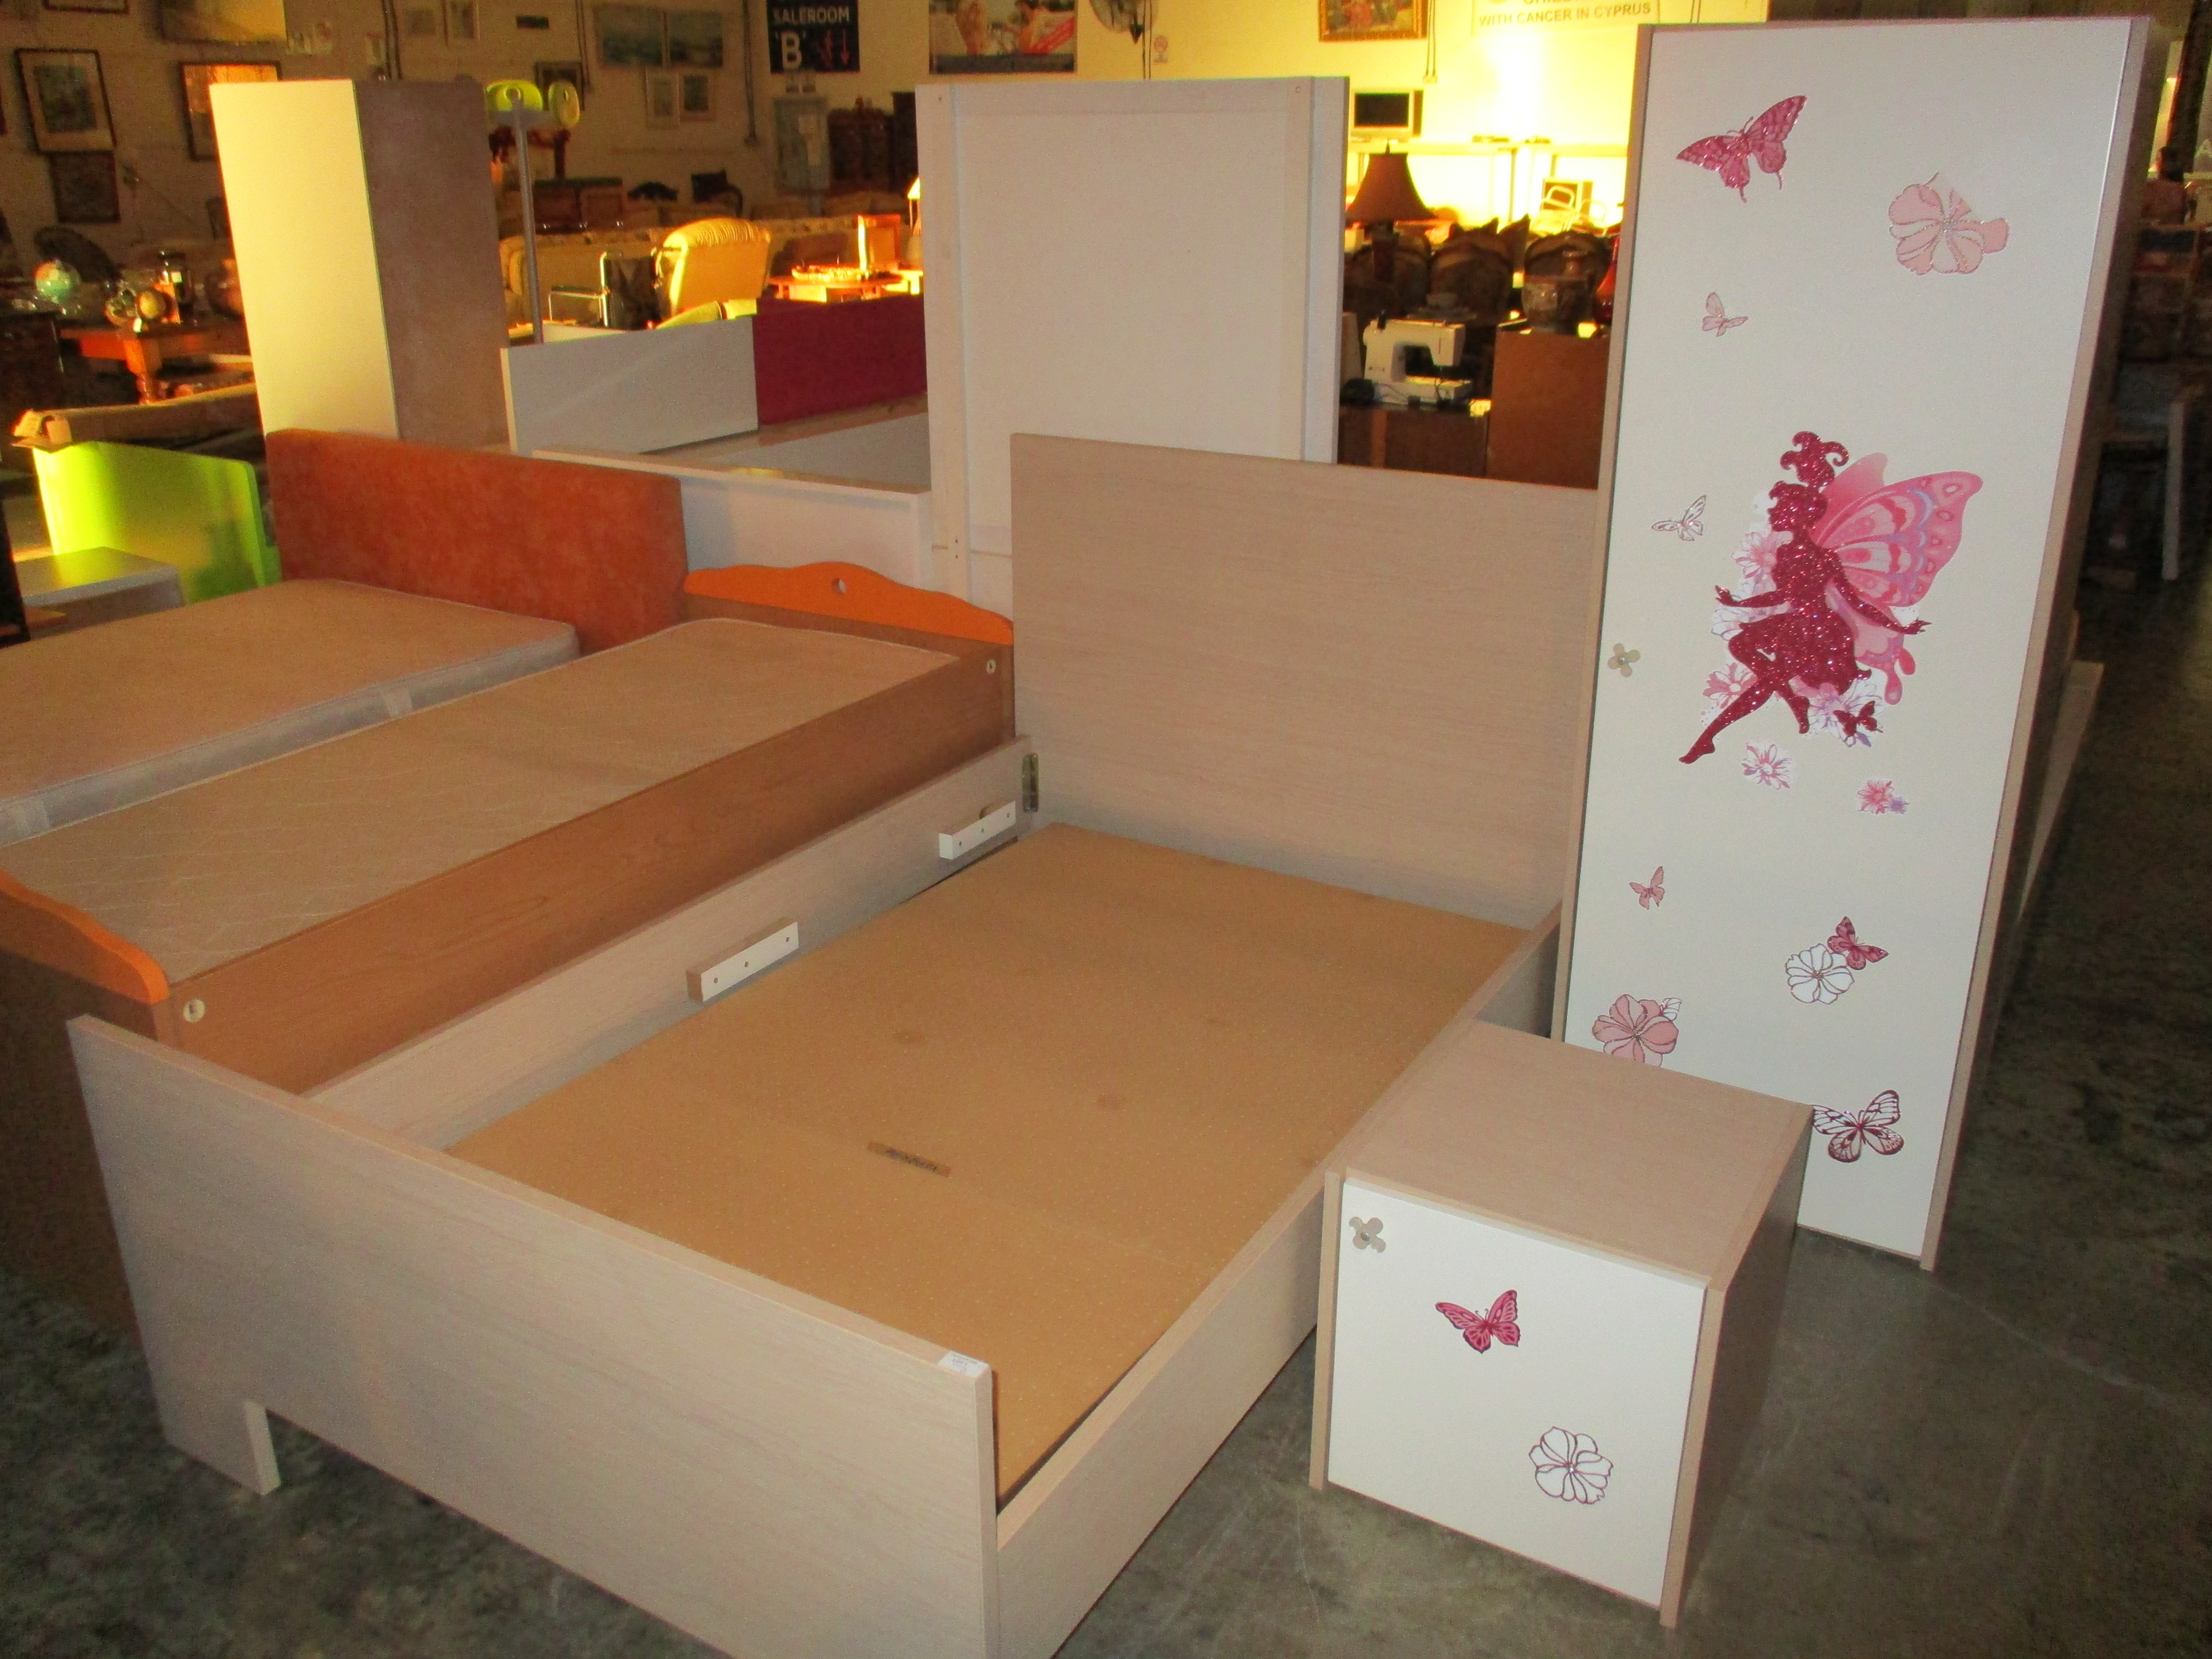 €1 START NO RESERVE AUCTION of bedroom and other liquidation stock from a closed furniture saleroom on January 12th 2019 at our Limassol Saleroom. ALL ITEMS MUST SELL!